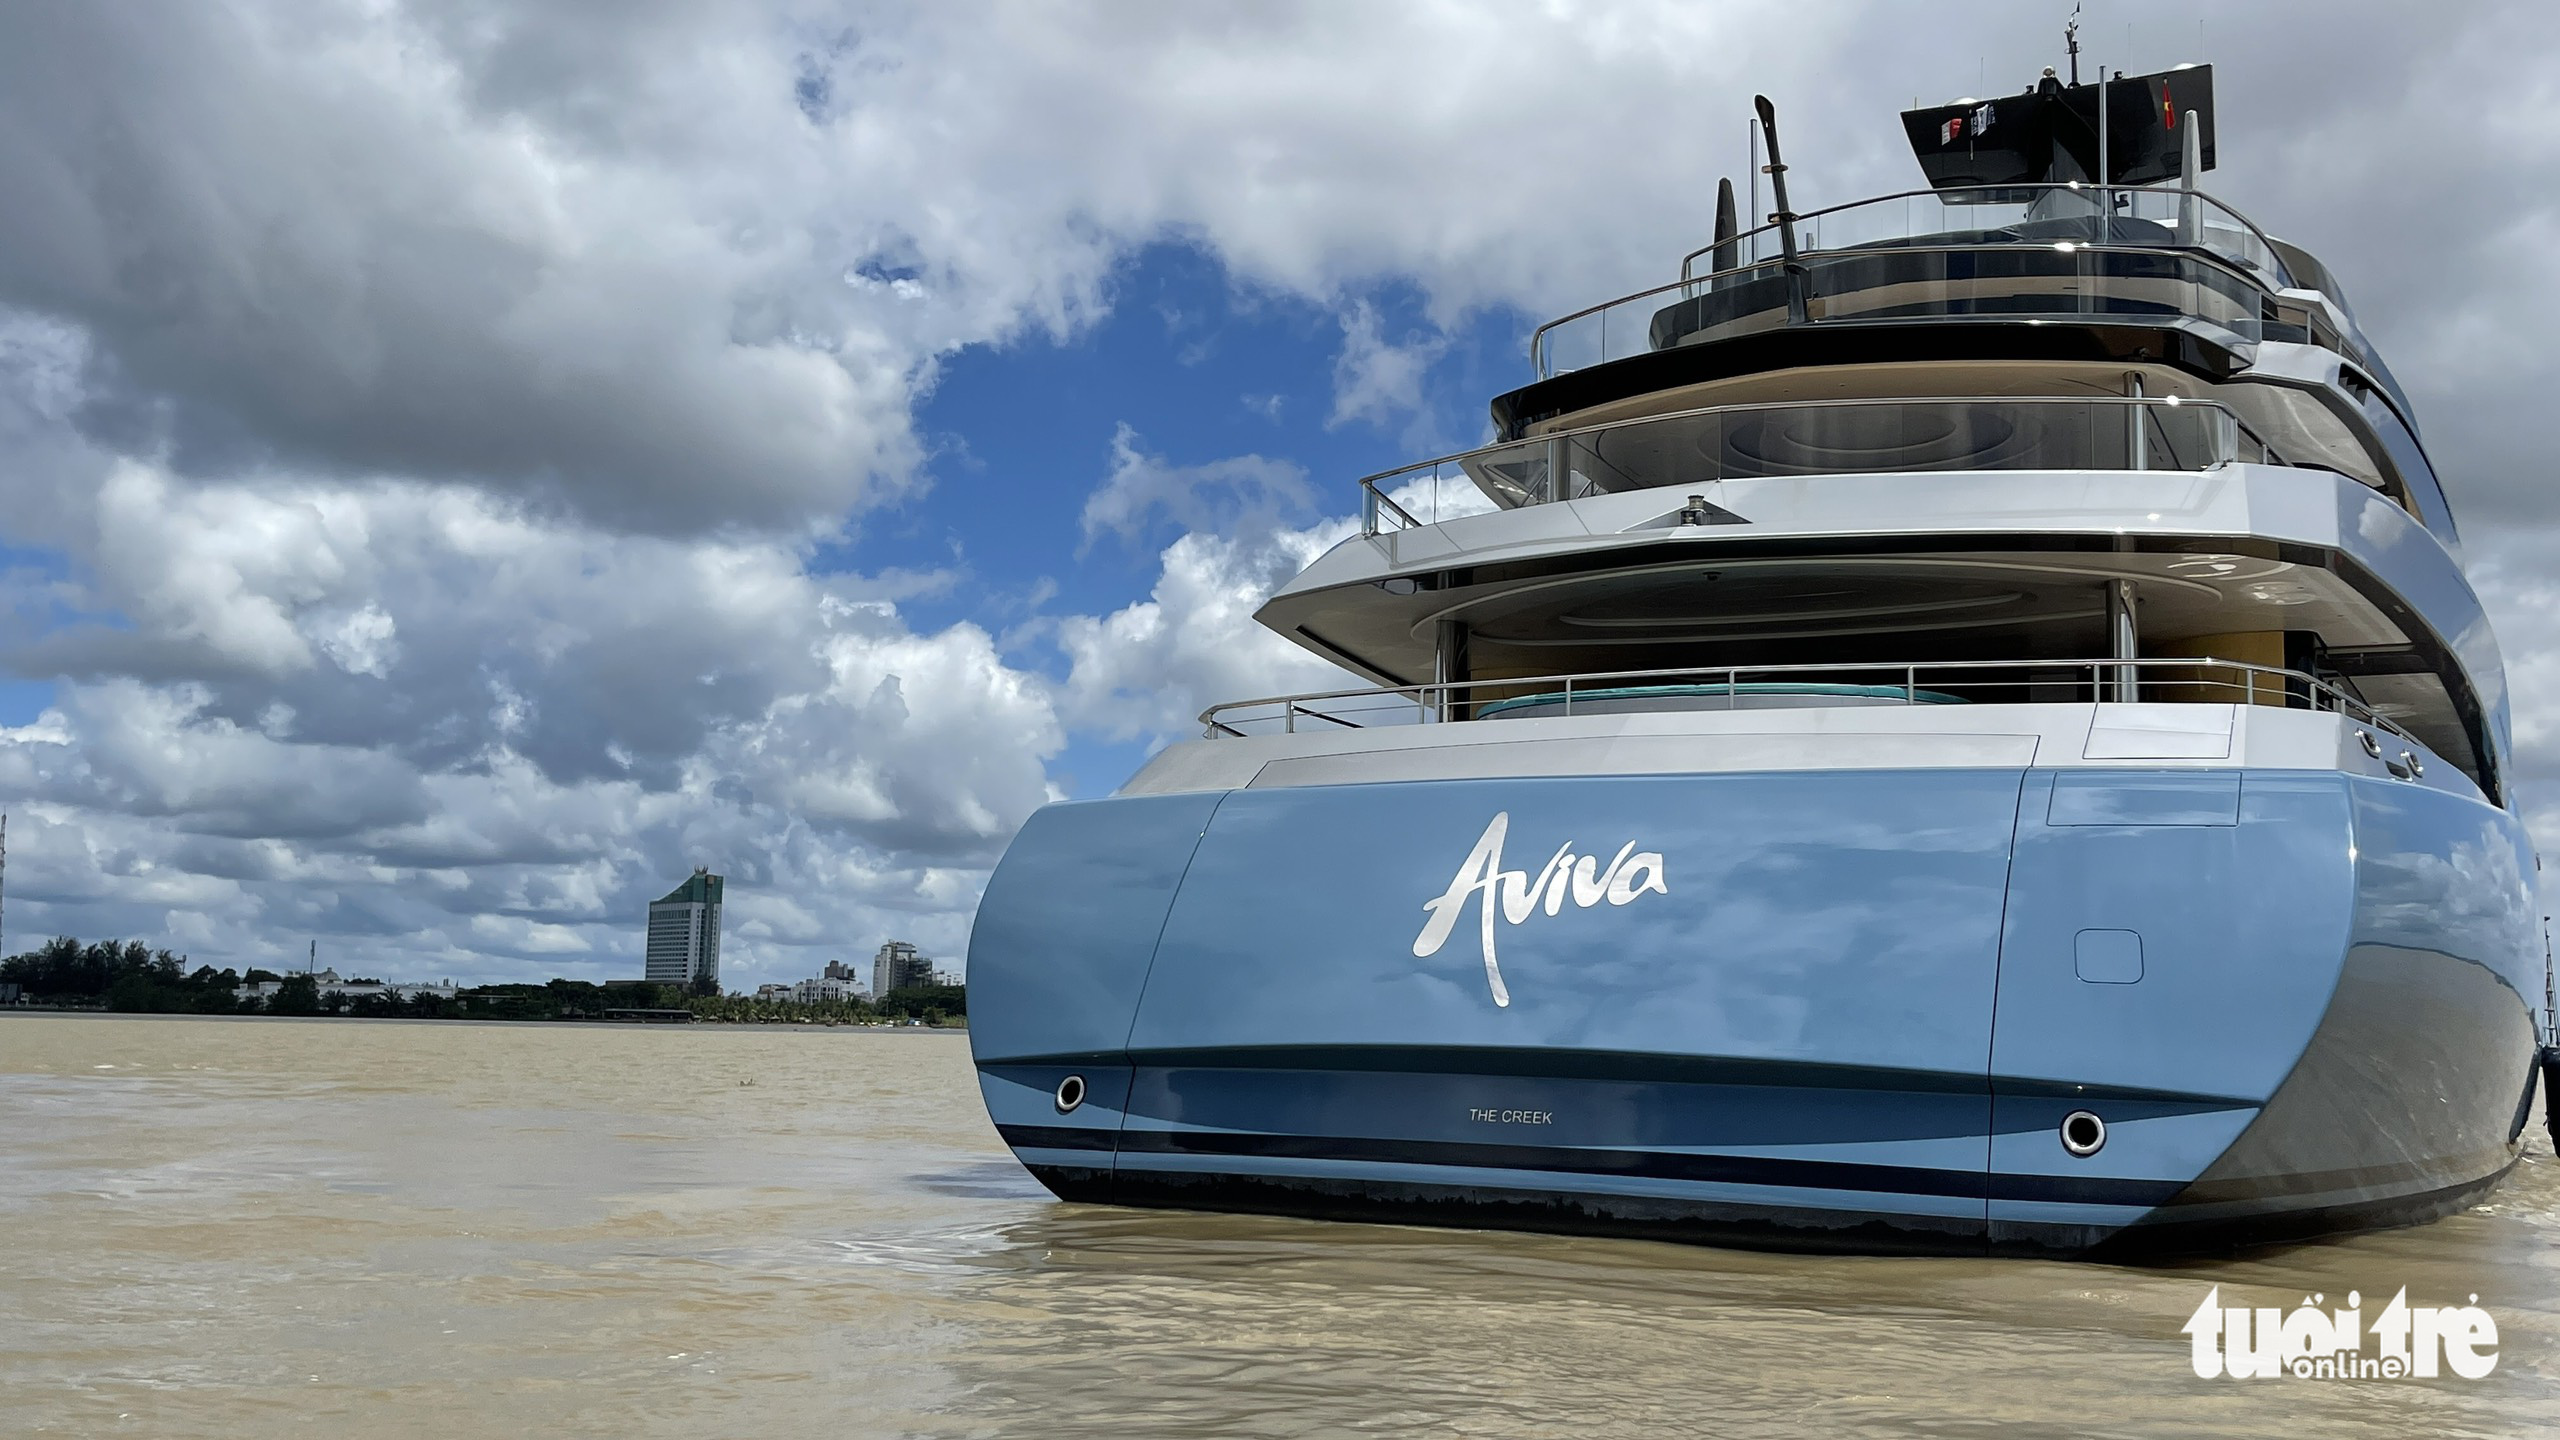 Superyacht Aviva of British billionaire Joe Lewis is anchored in the Hau River area near the Can Tho Bridge in Can Tho City, Vietnam, June 5, 2022. Photo: Nguyen Dinh / Tuoi Tre